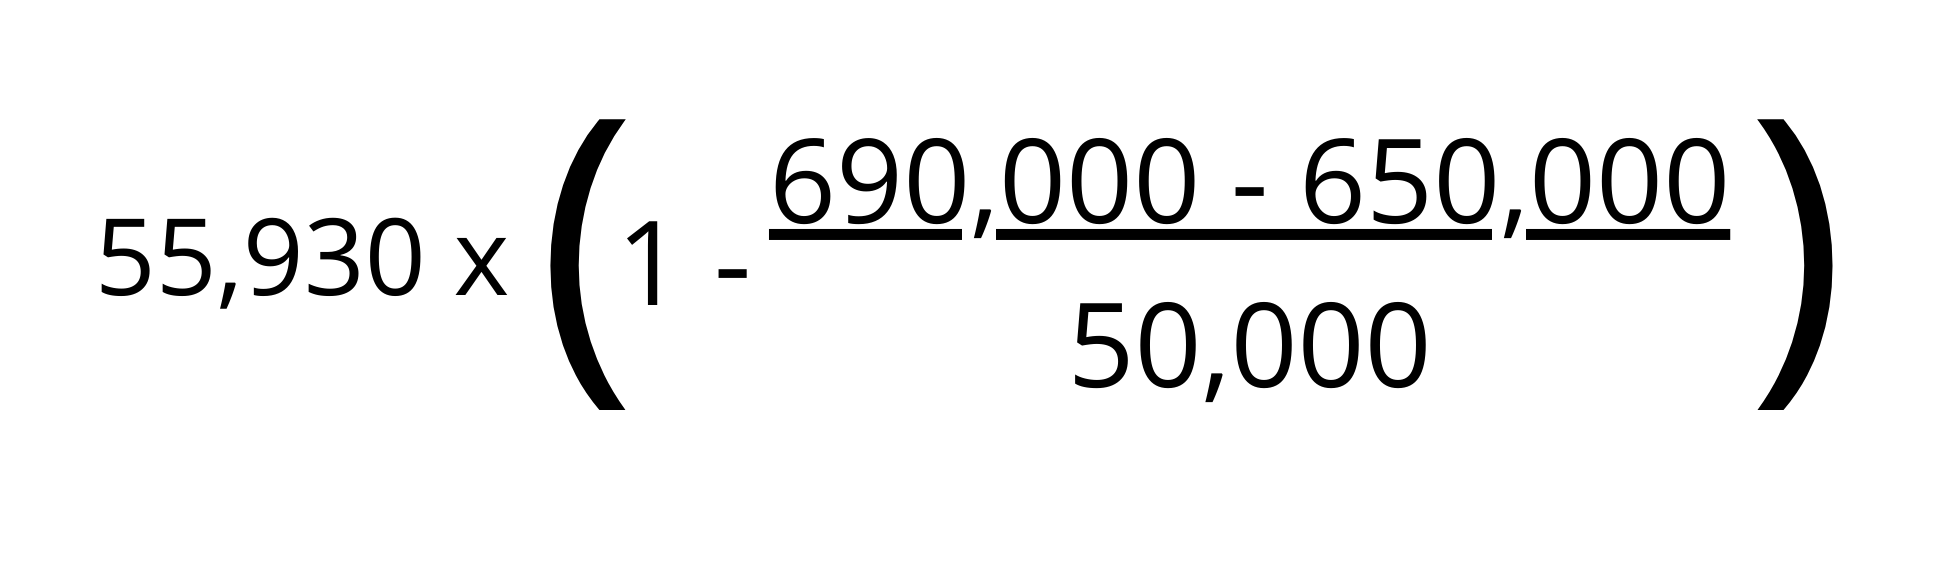 stamp duty relief formula for new homes which is relief equals 55,930 multiplied by bracket 1 - 690,000 - 650,000 divided by 50,000)